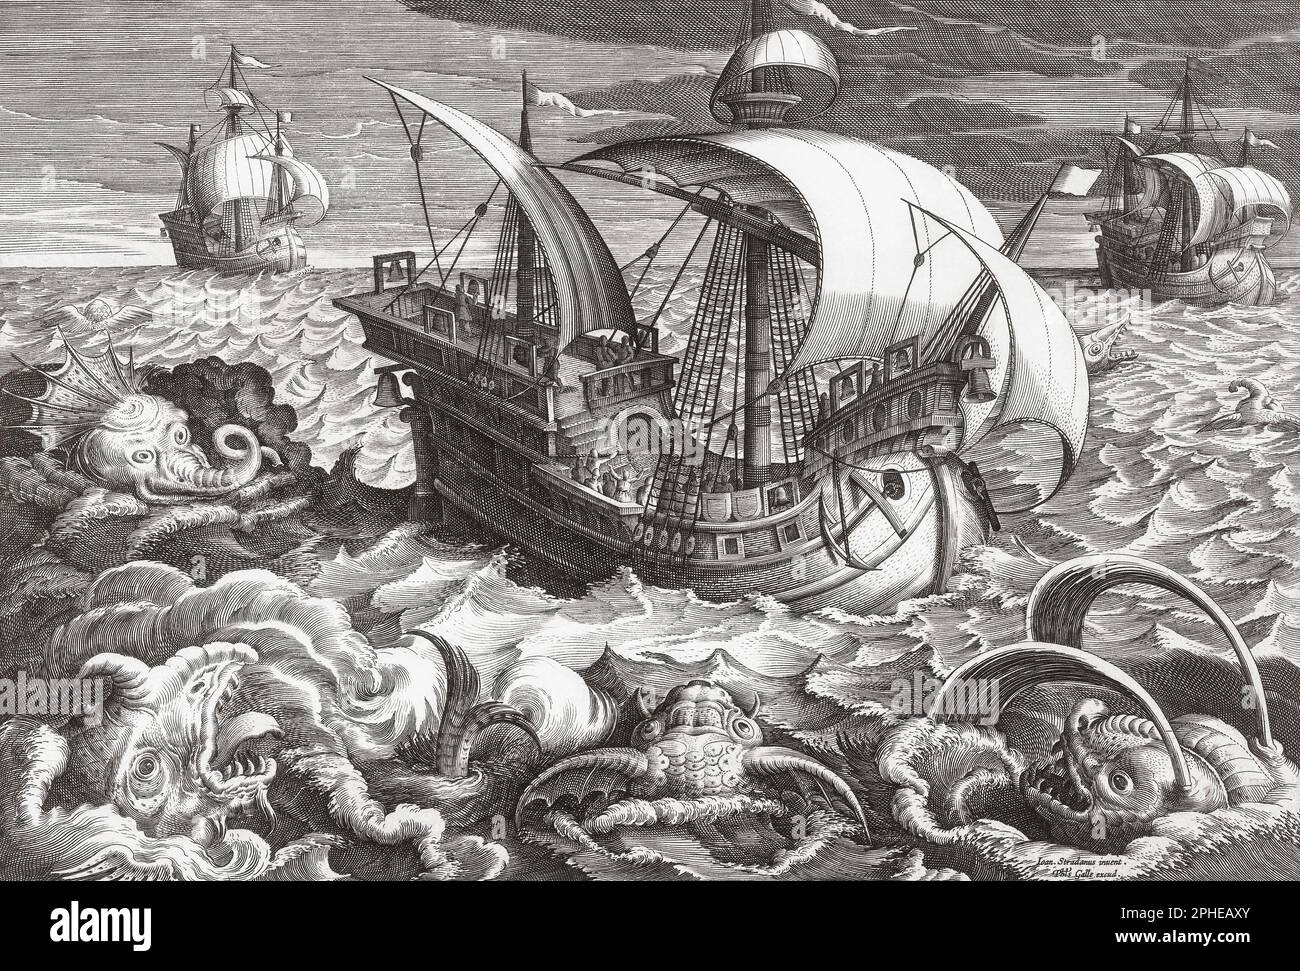 Sea monsters surround a ship in the open seas.  From a 16th century engraving by Adriaen Collaert. Stock Photo